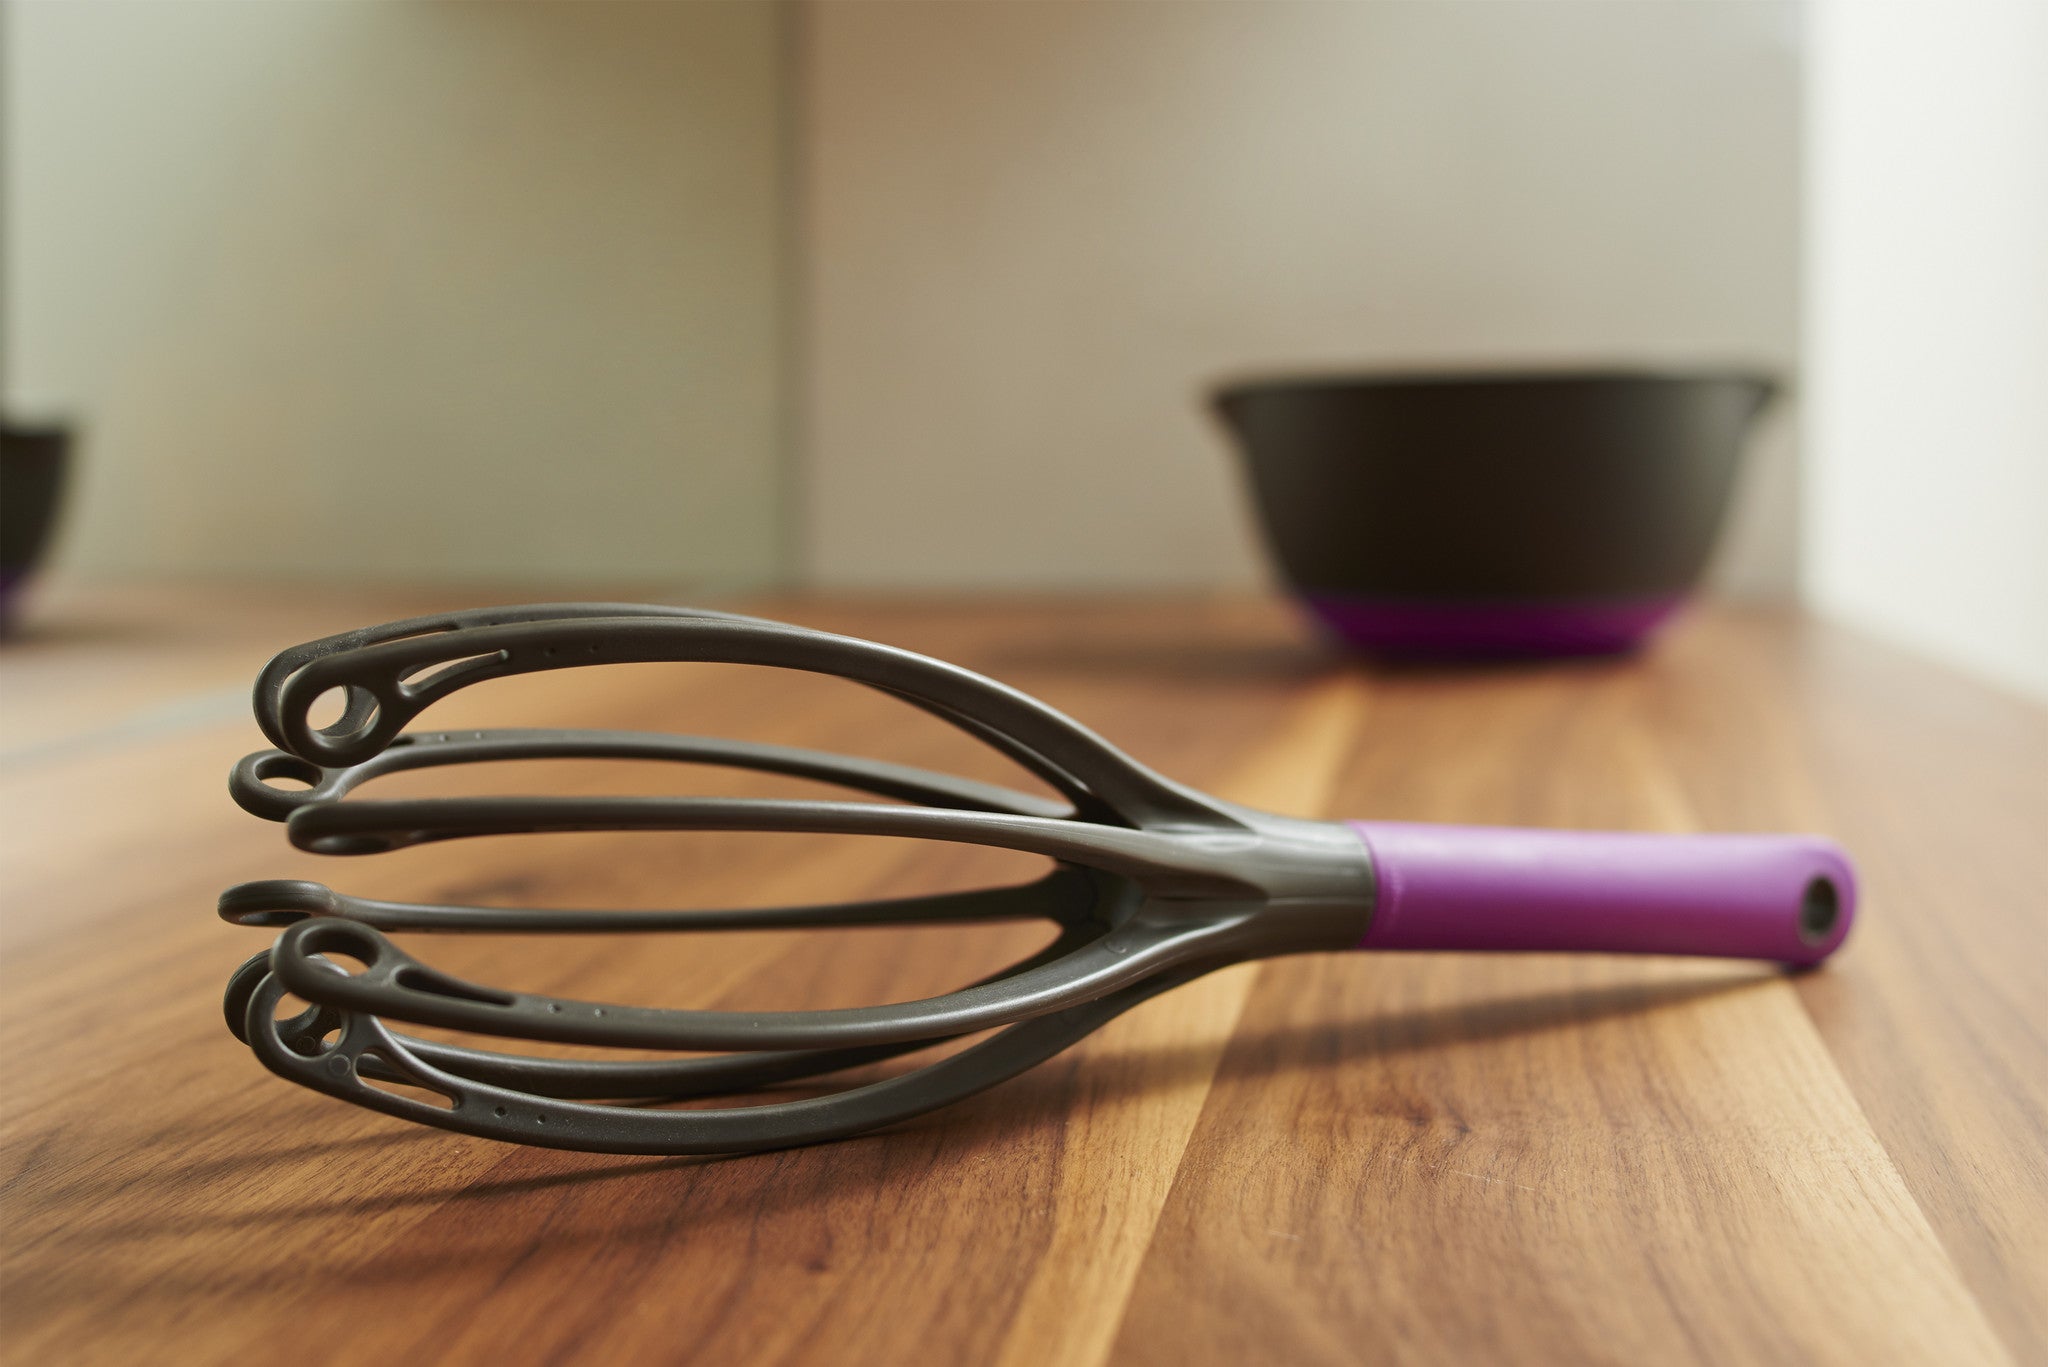 Balloon whisk vs electric hand mixer : r/AskCulinary